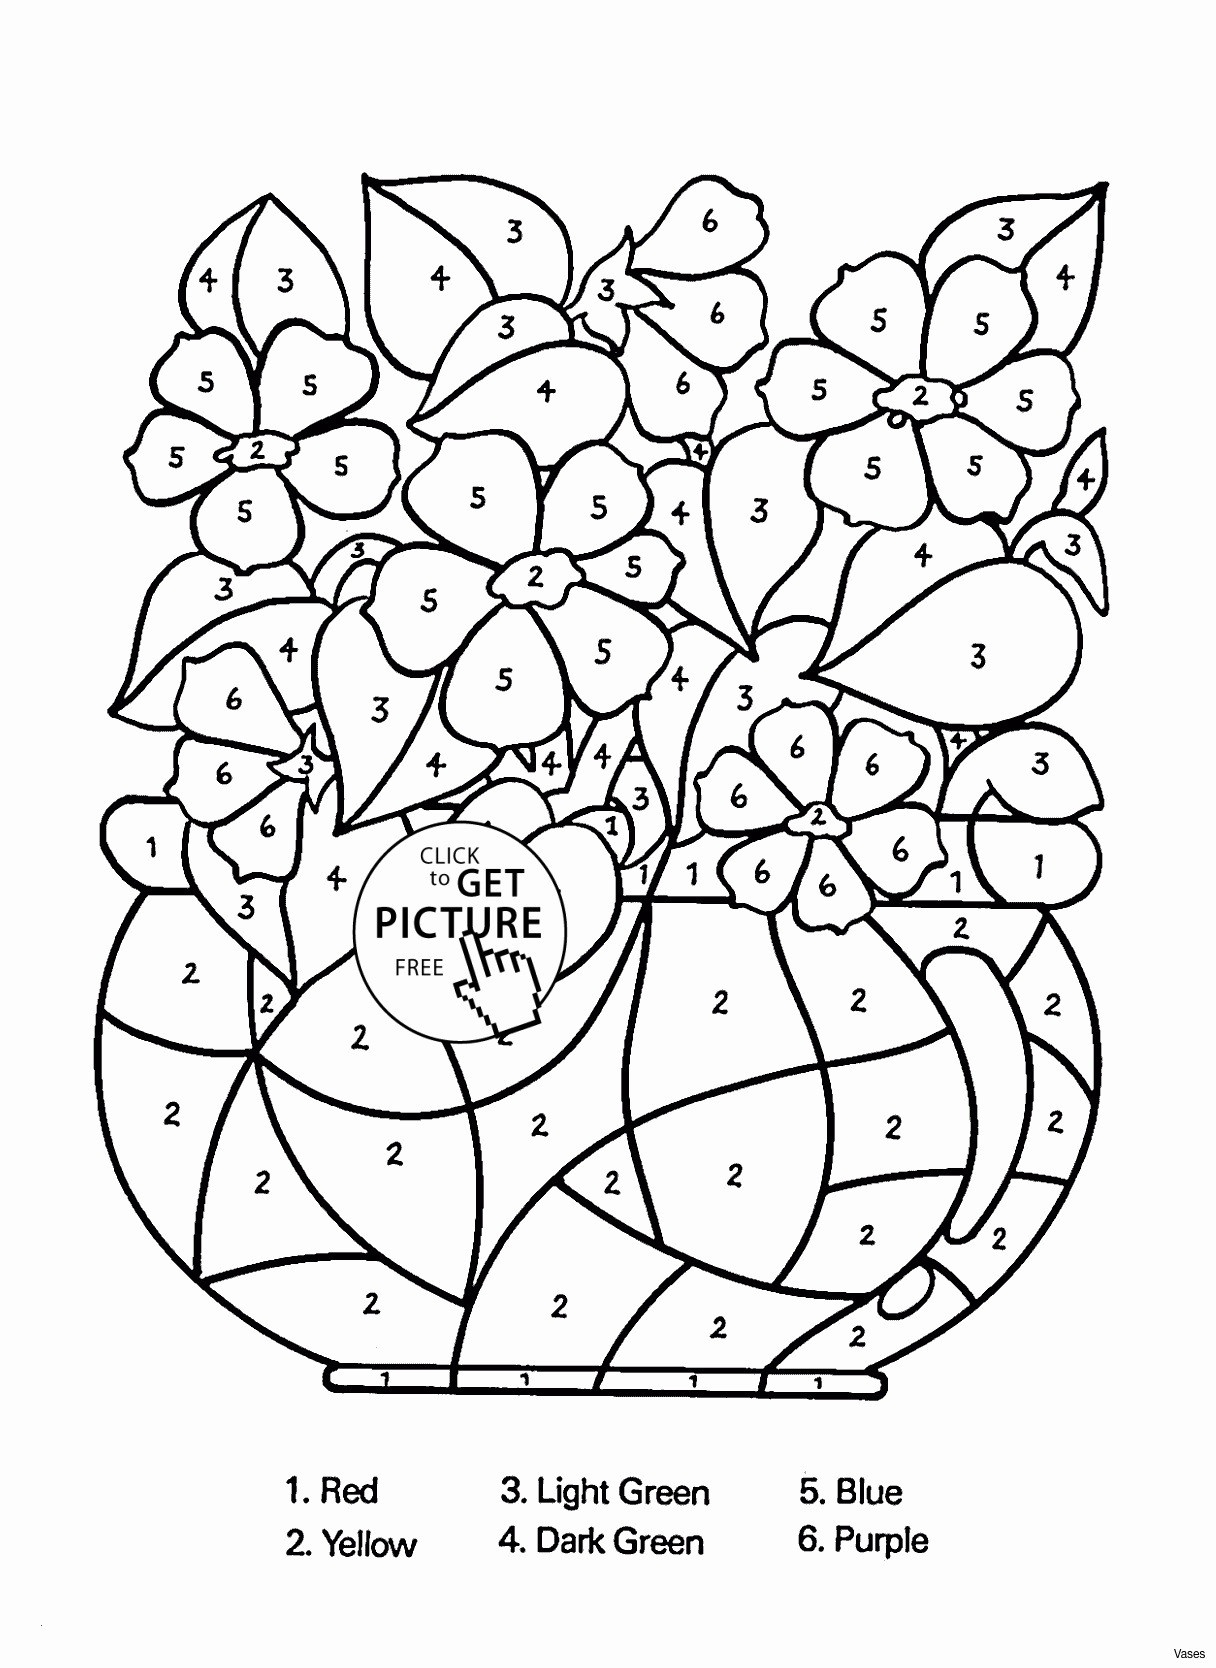 Coloring: Printable Bible Coloring Pages. Christian Coloring Pages - Free Printable Ten Commandments Coloring Pages